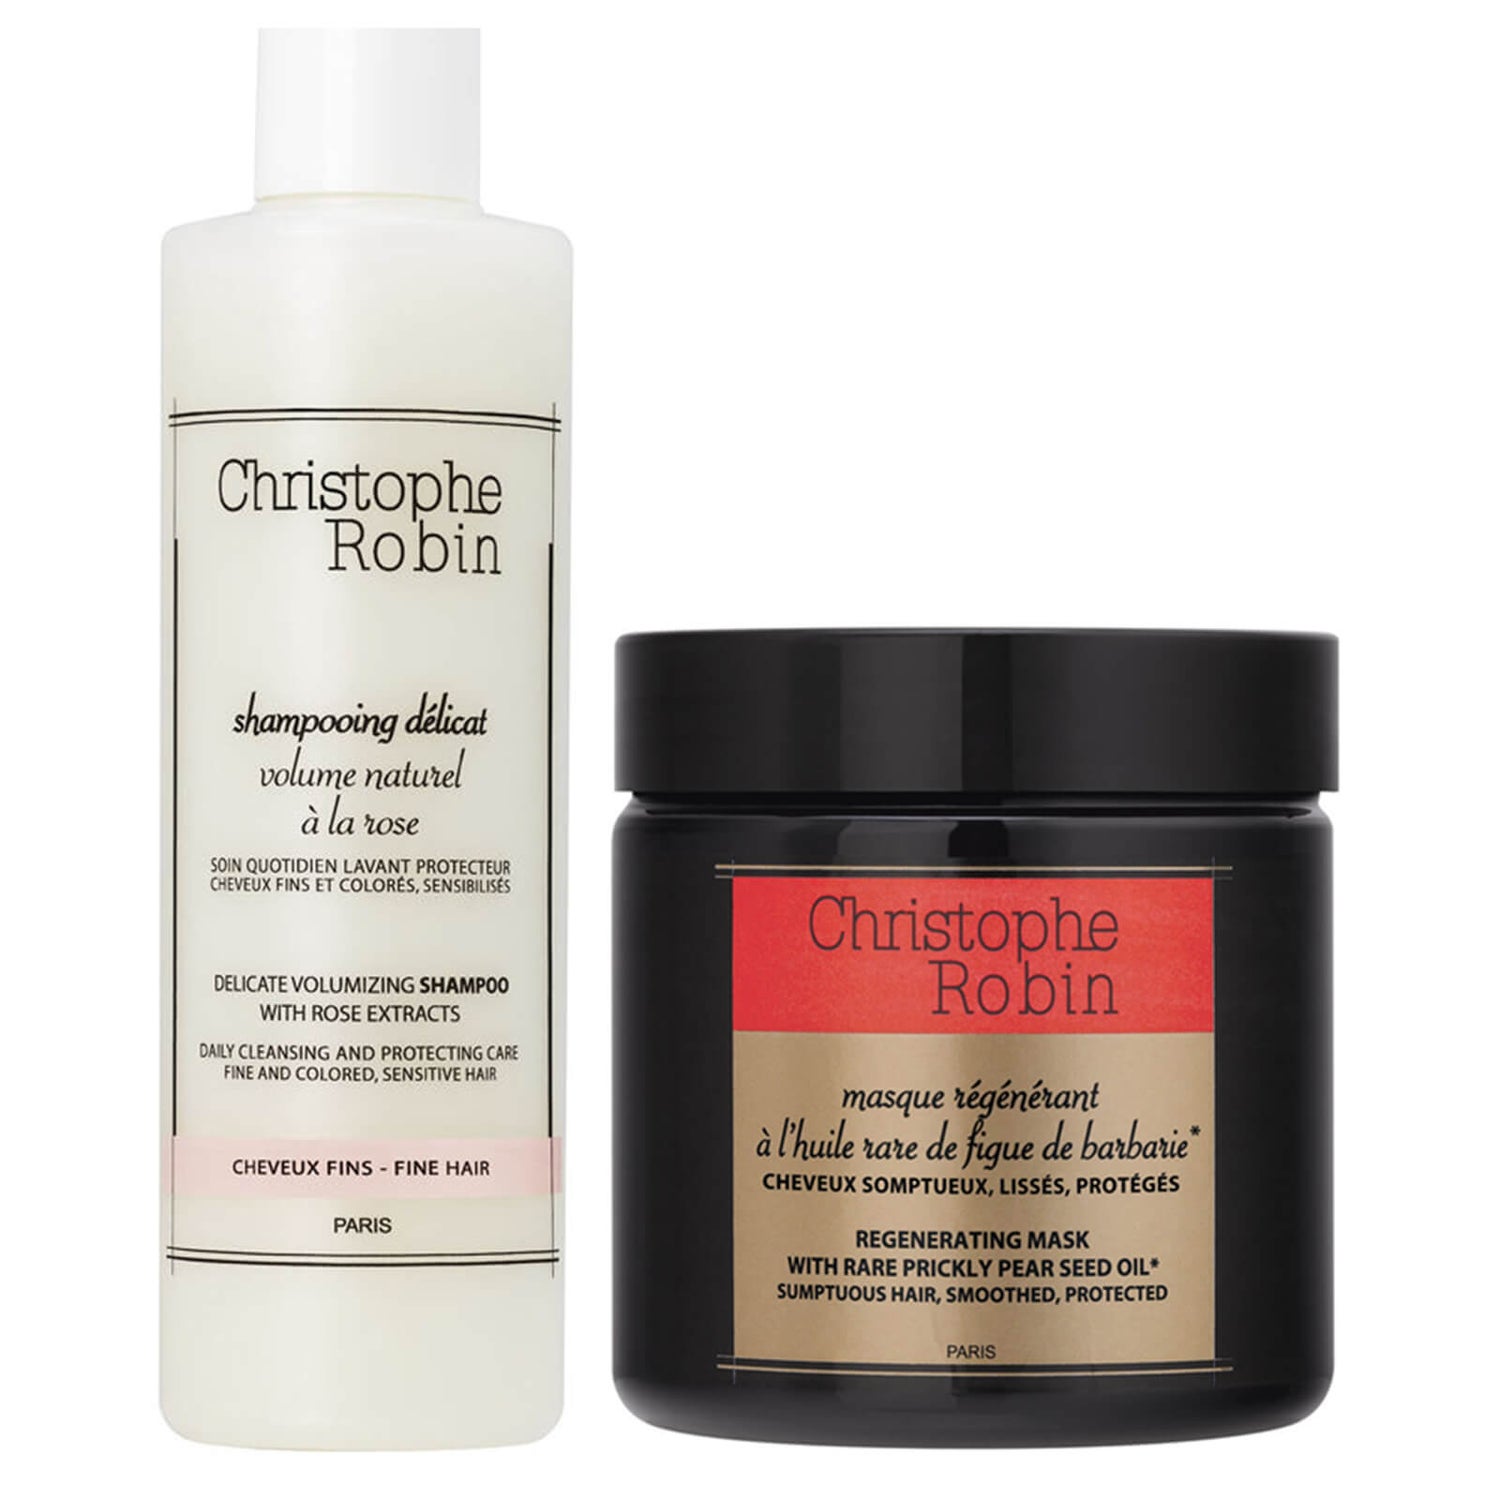 Christophe Robin Regenerating Mask (250ml) and Delicate Volumizing Shampoo with Rose Extracts (250ml) (Worth £81.00)